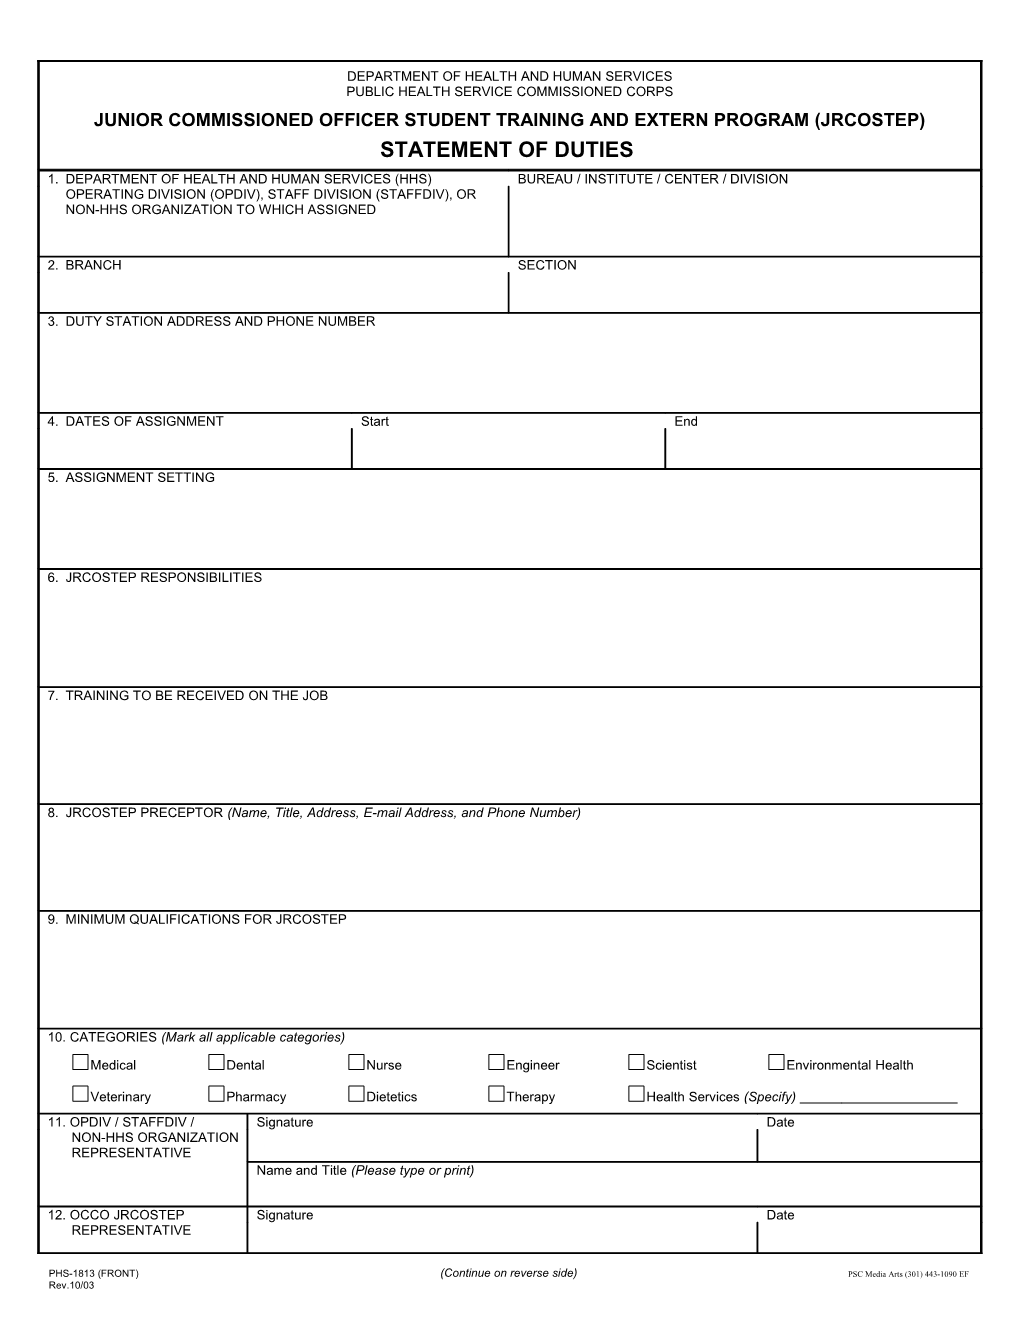 Prepare a Typed Copy of Form PHS-6279 for Each Assignment